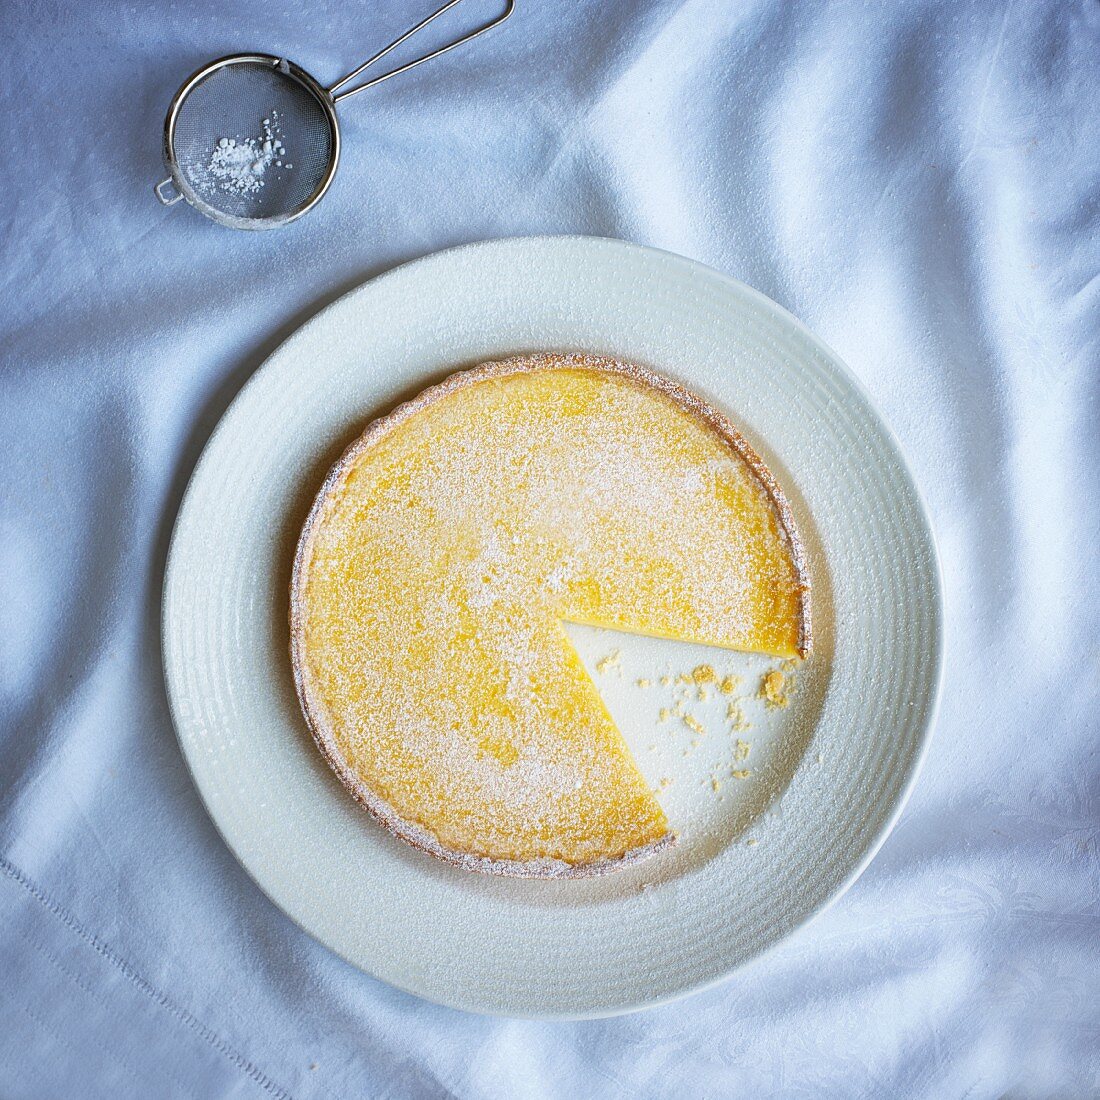 Lemon tart with icing sugar, sliced (seen from above)